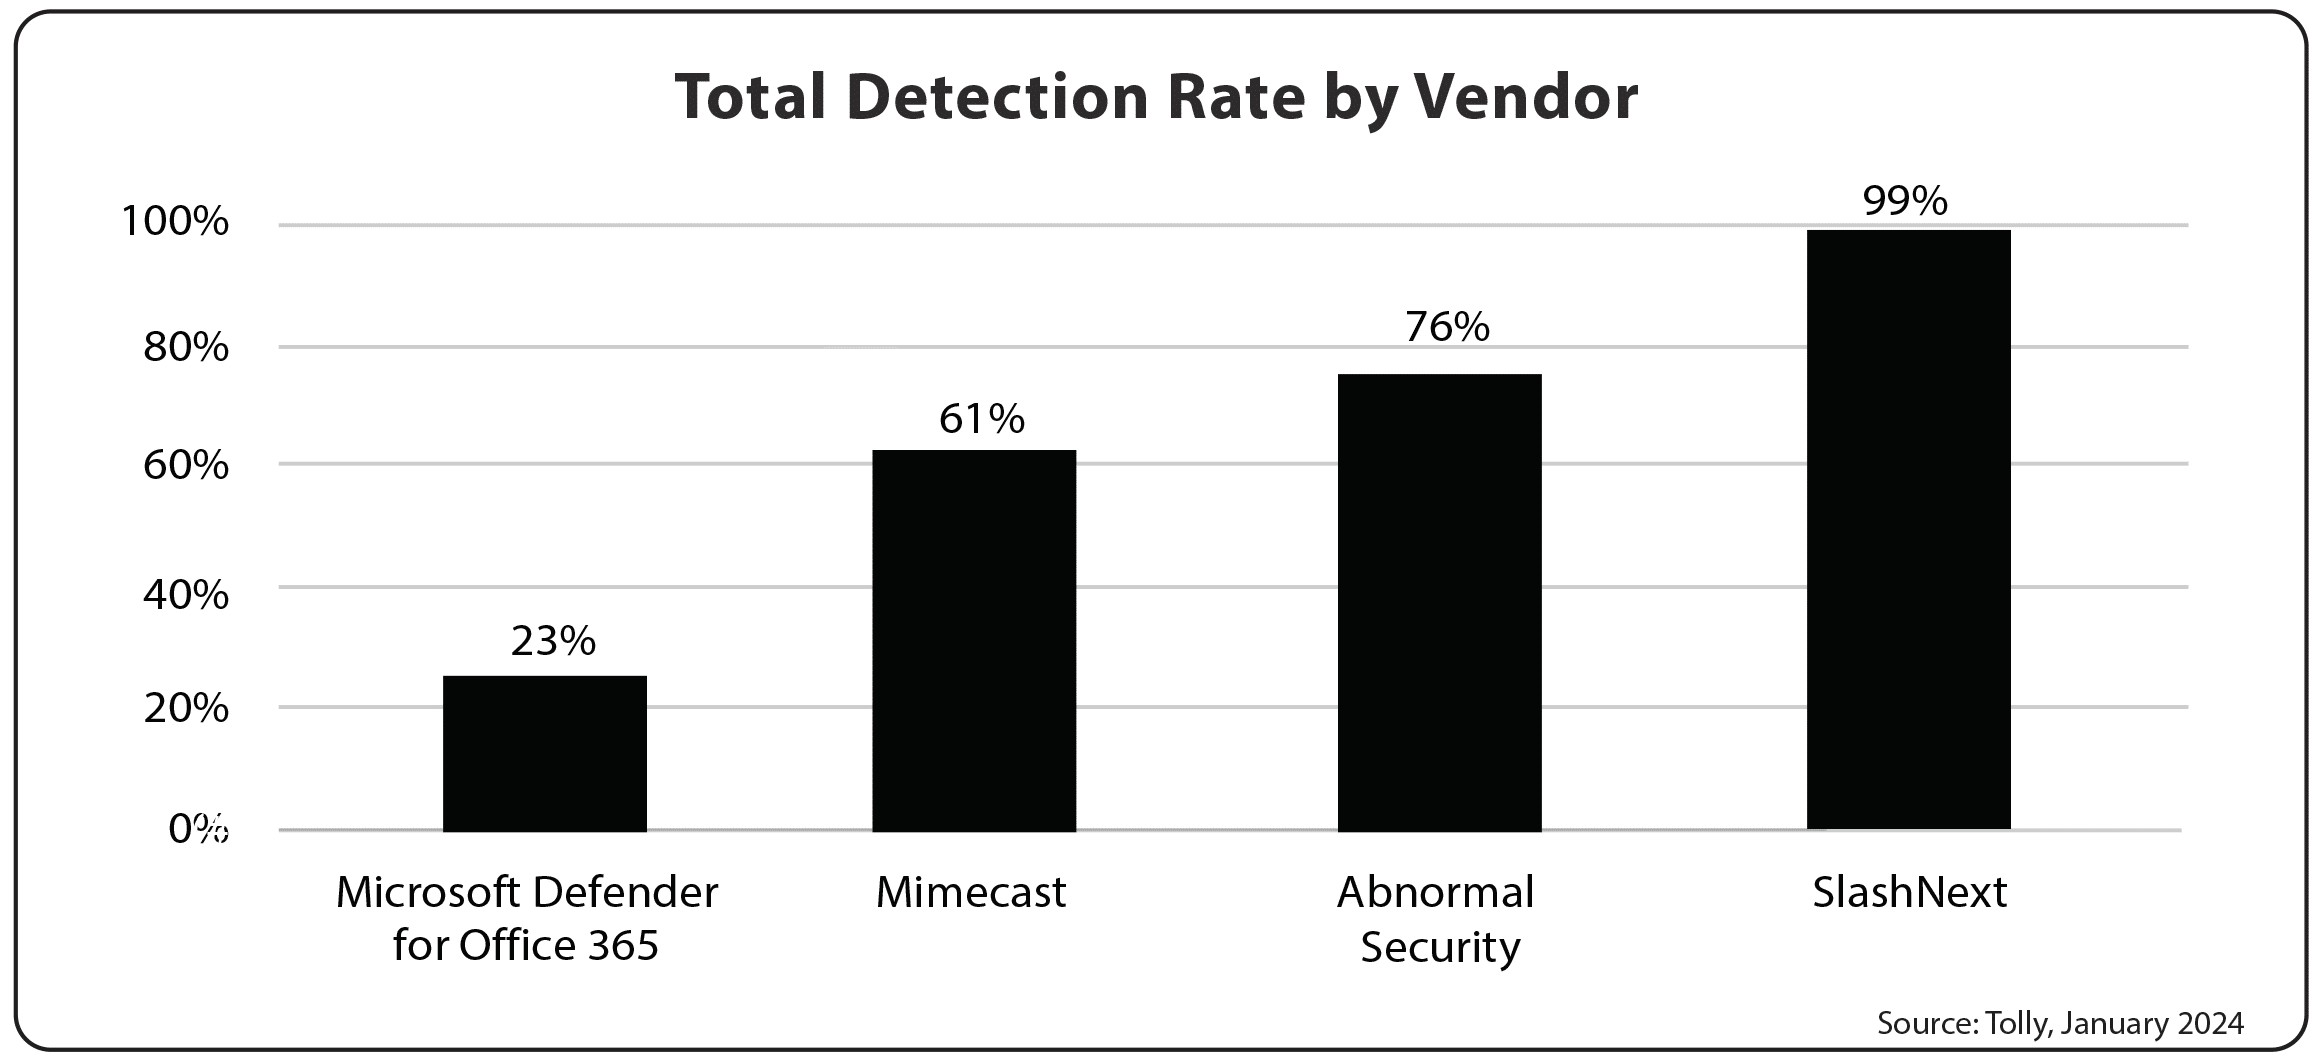 SlashNext had a detection rate of 99%, which is more than 20% higher than the next service